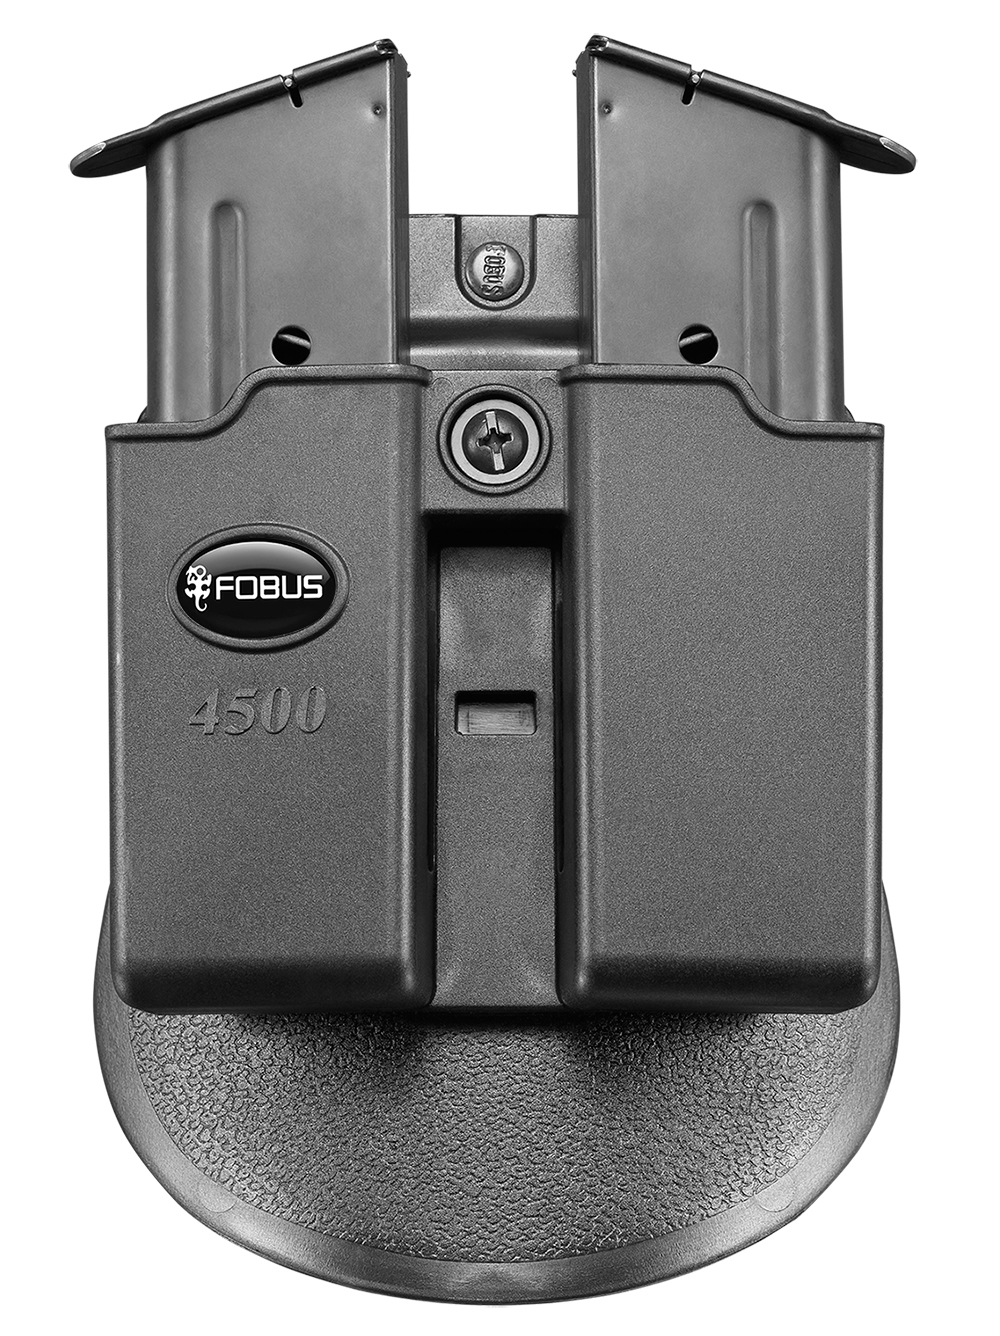 Fobus 4500p Paddle Double Magazine Pouch Single Stack 1911 Iai4500p for sale online 